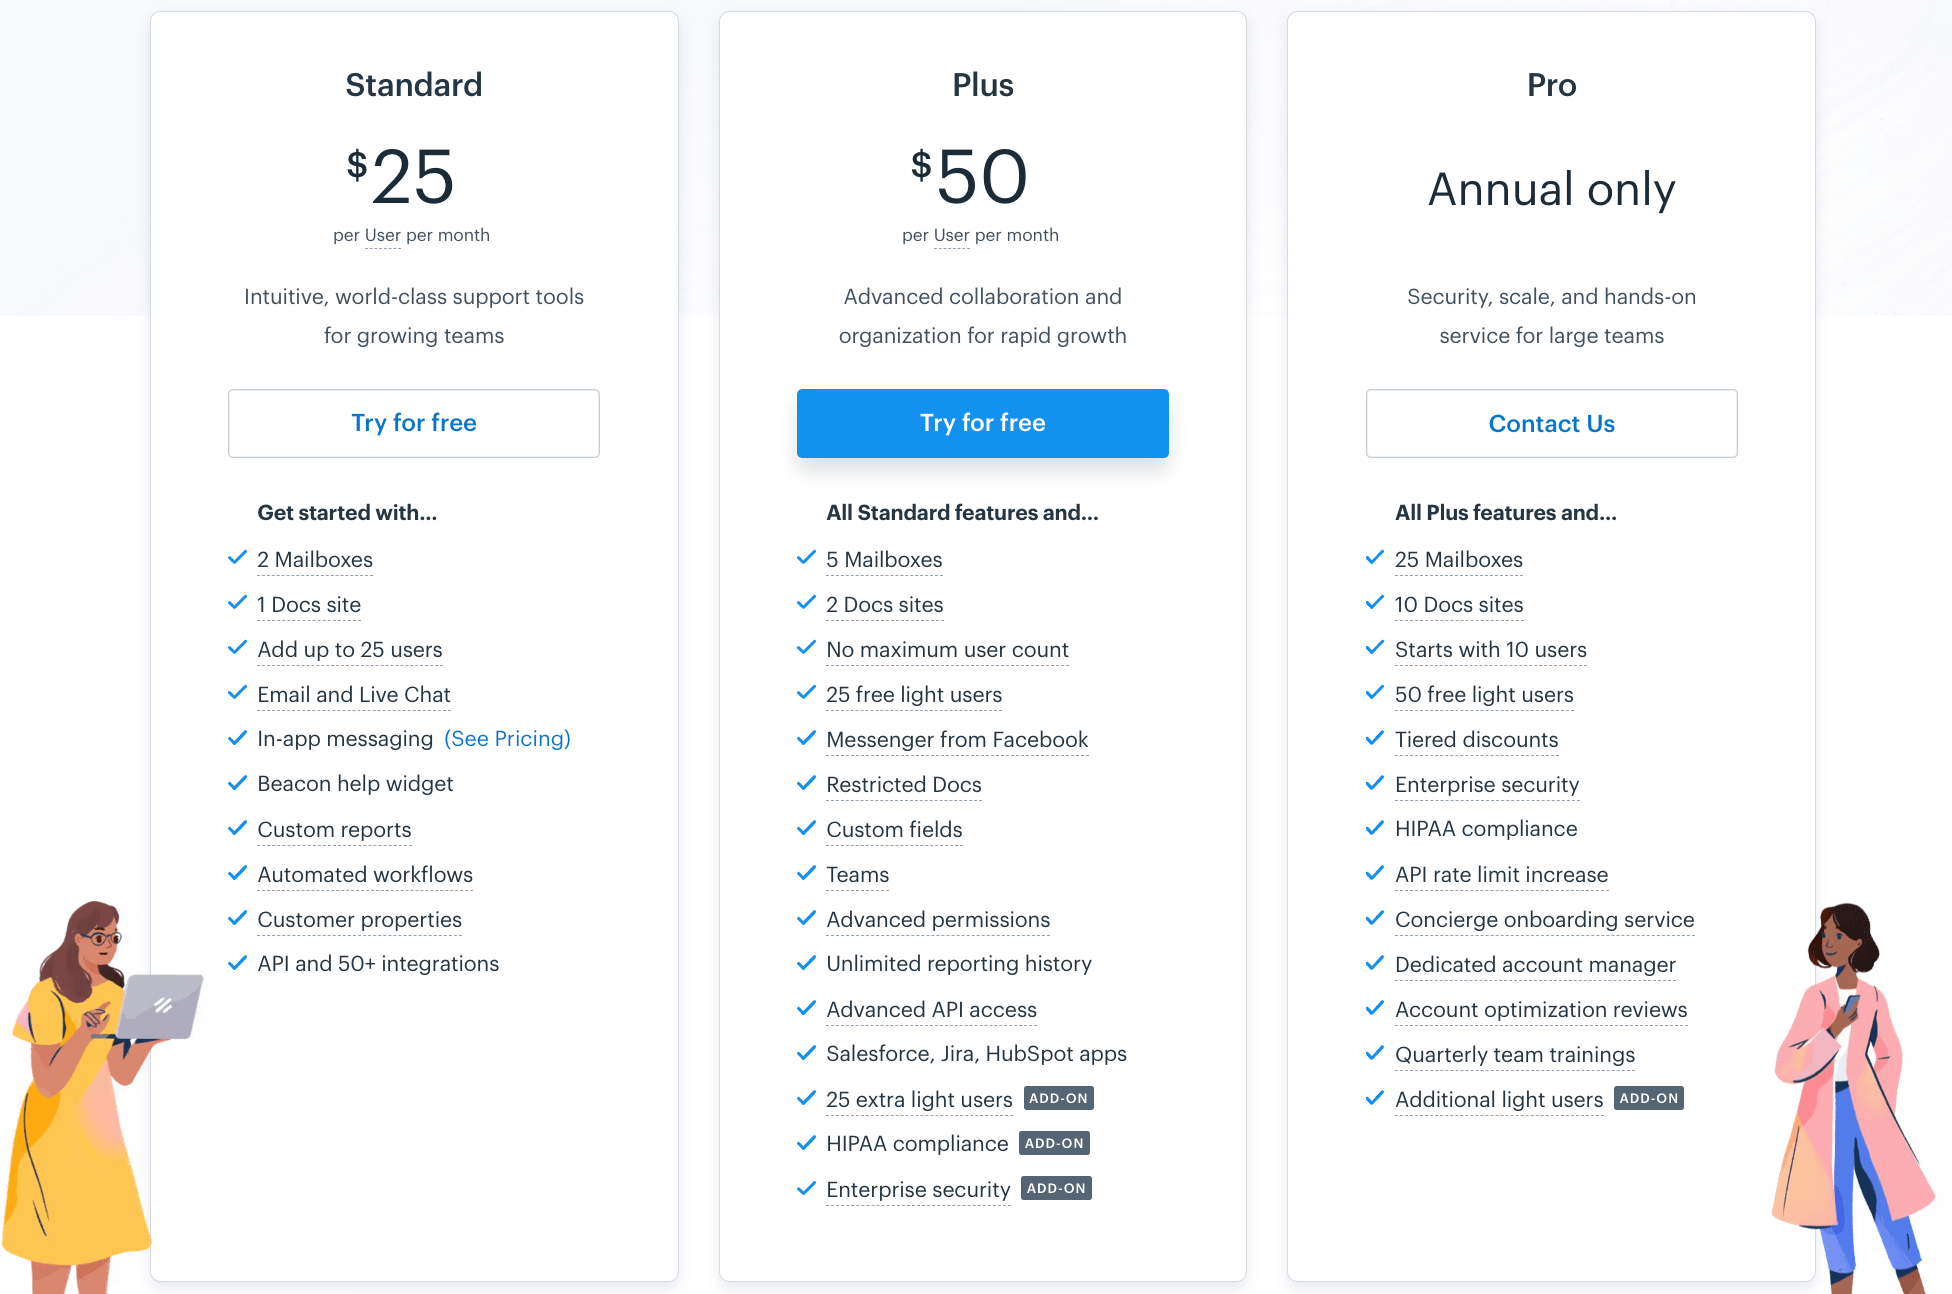 Help Scout - customer support SaaS tool - pricing plans